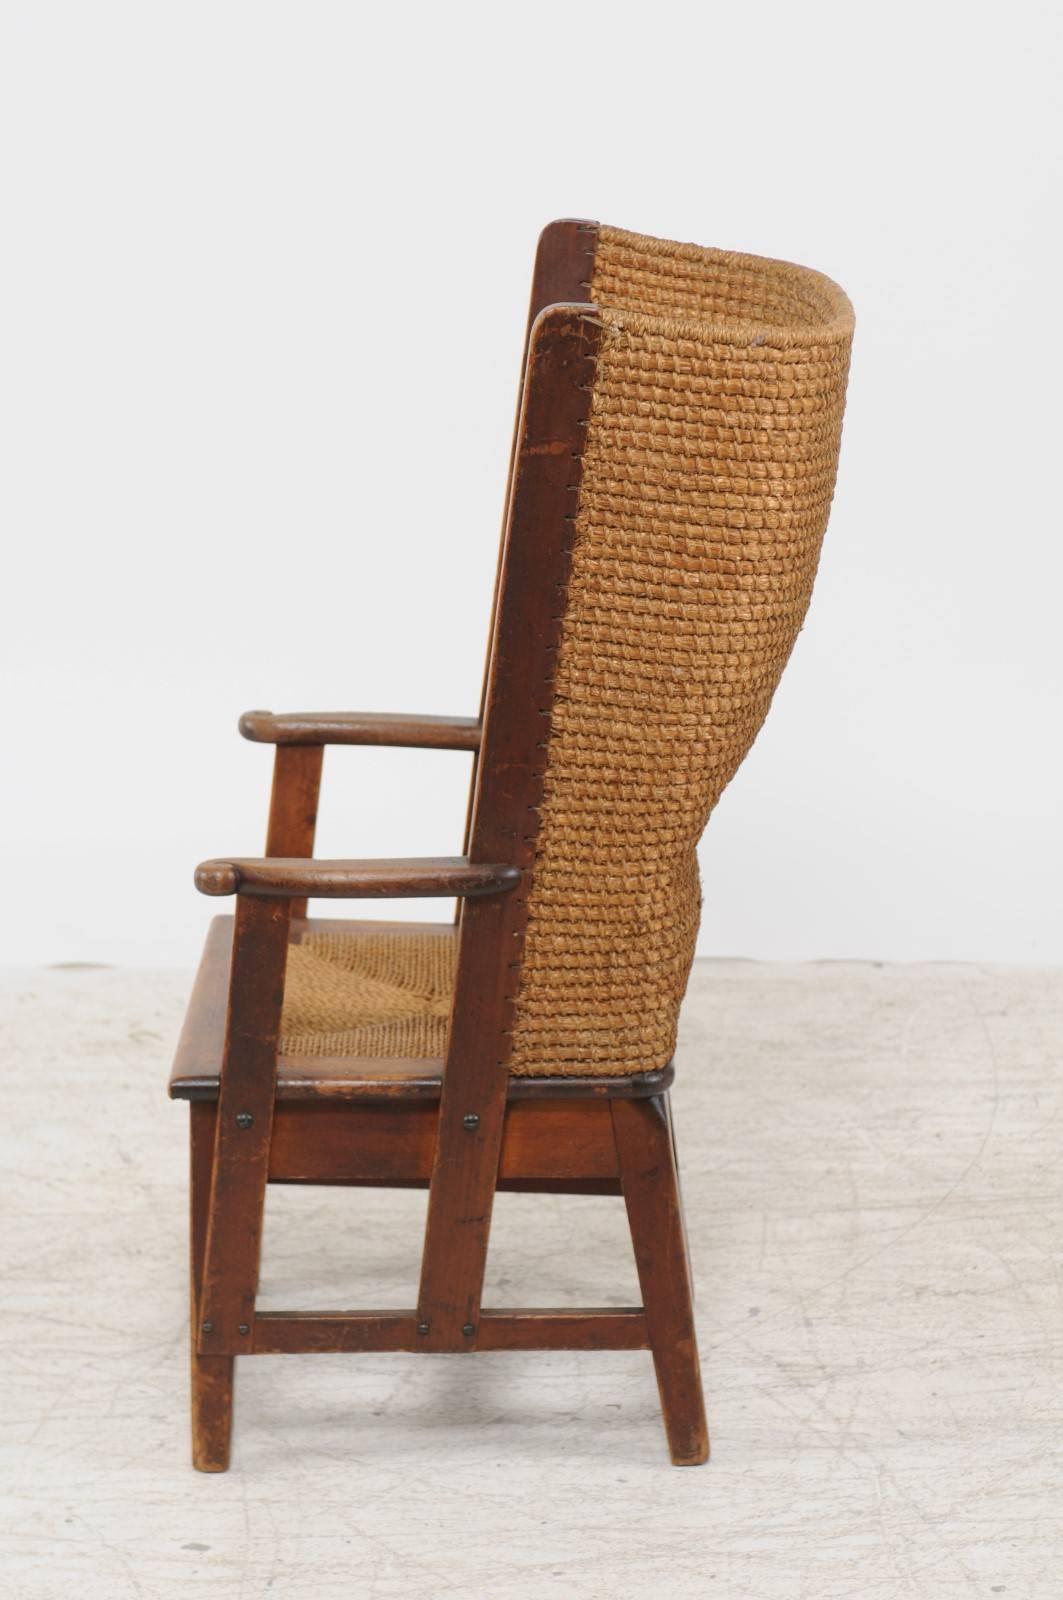 Scottish Late 19th Century Orkney Chair with Wraparound Handwoven Straw Back 1